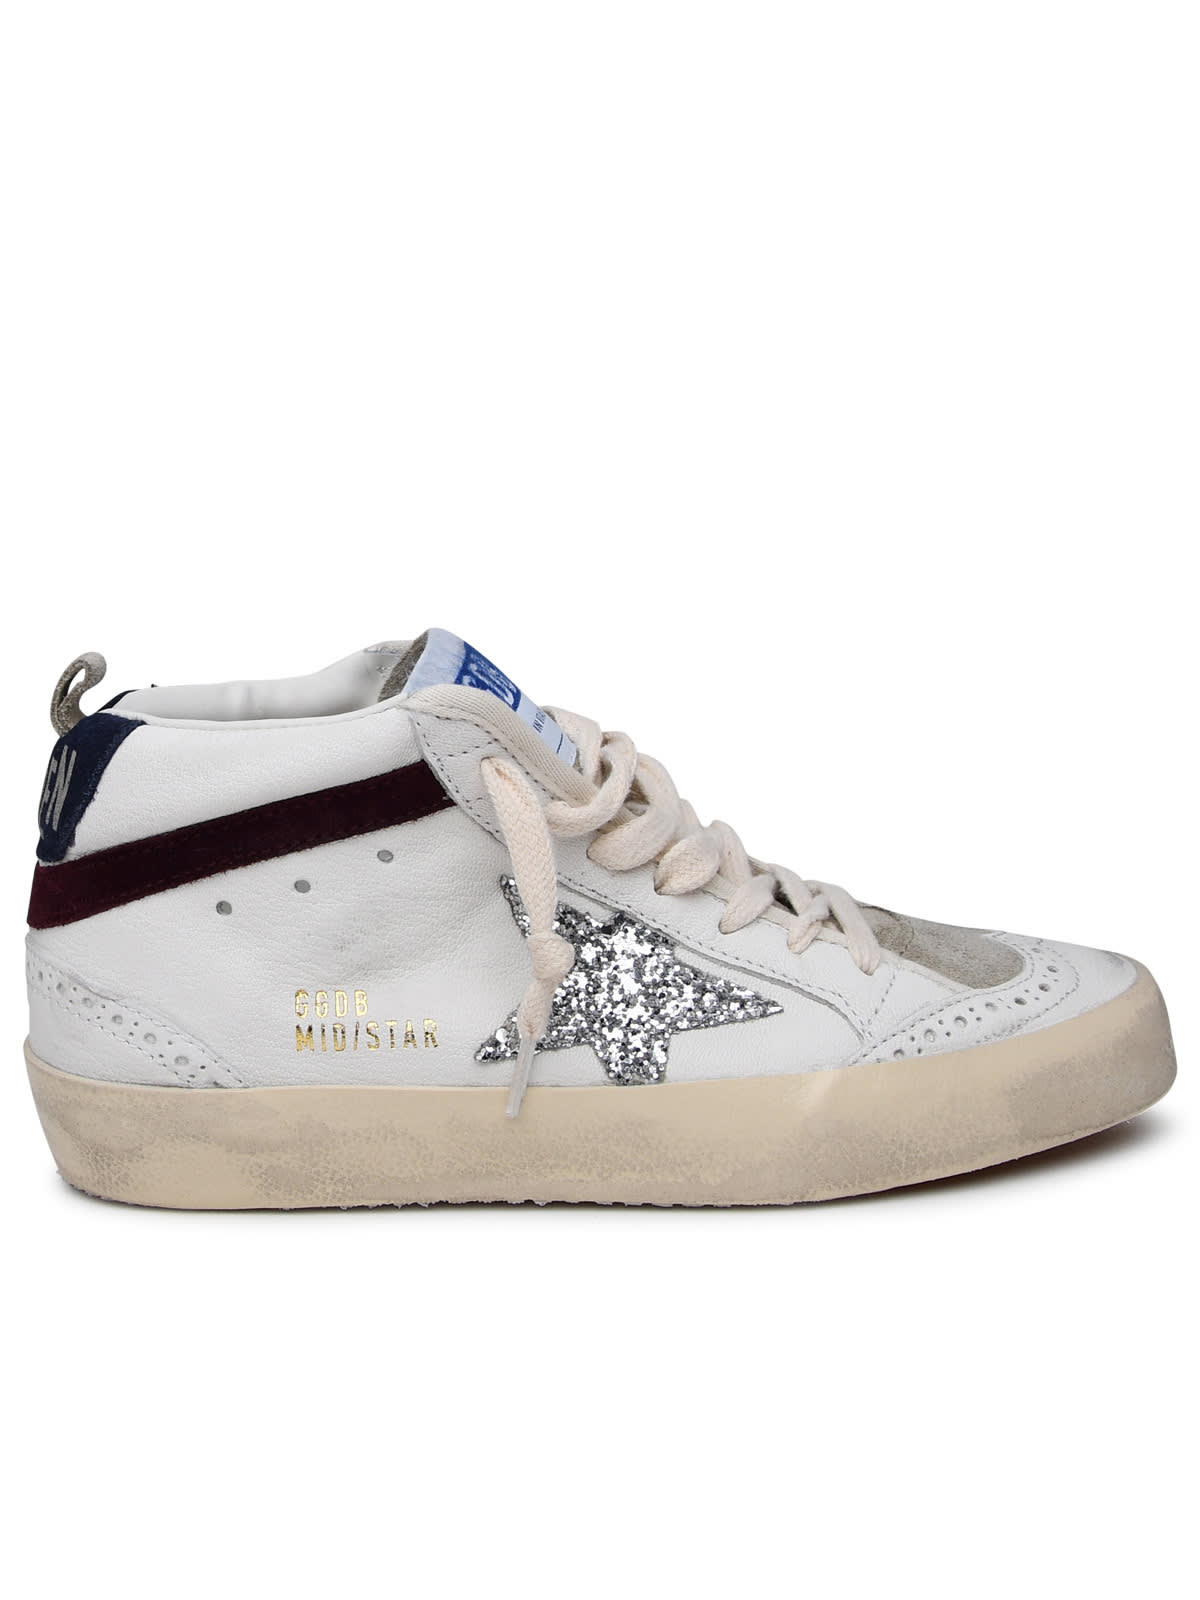 GOLDEN GOOSE WHITE LEATHER MID STAR SNEAKERS